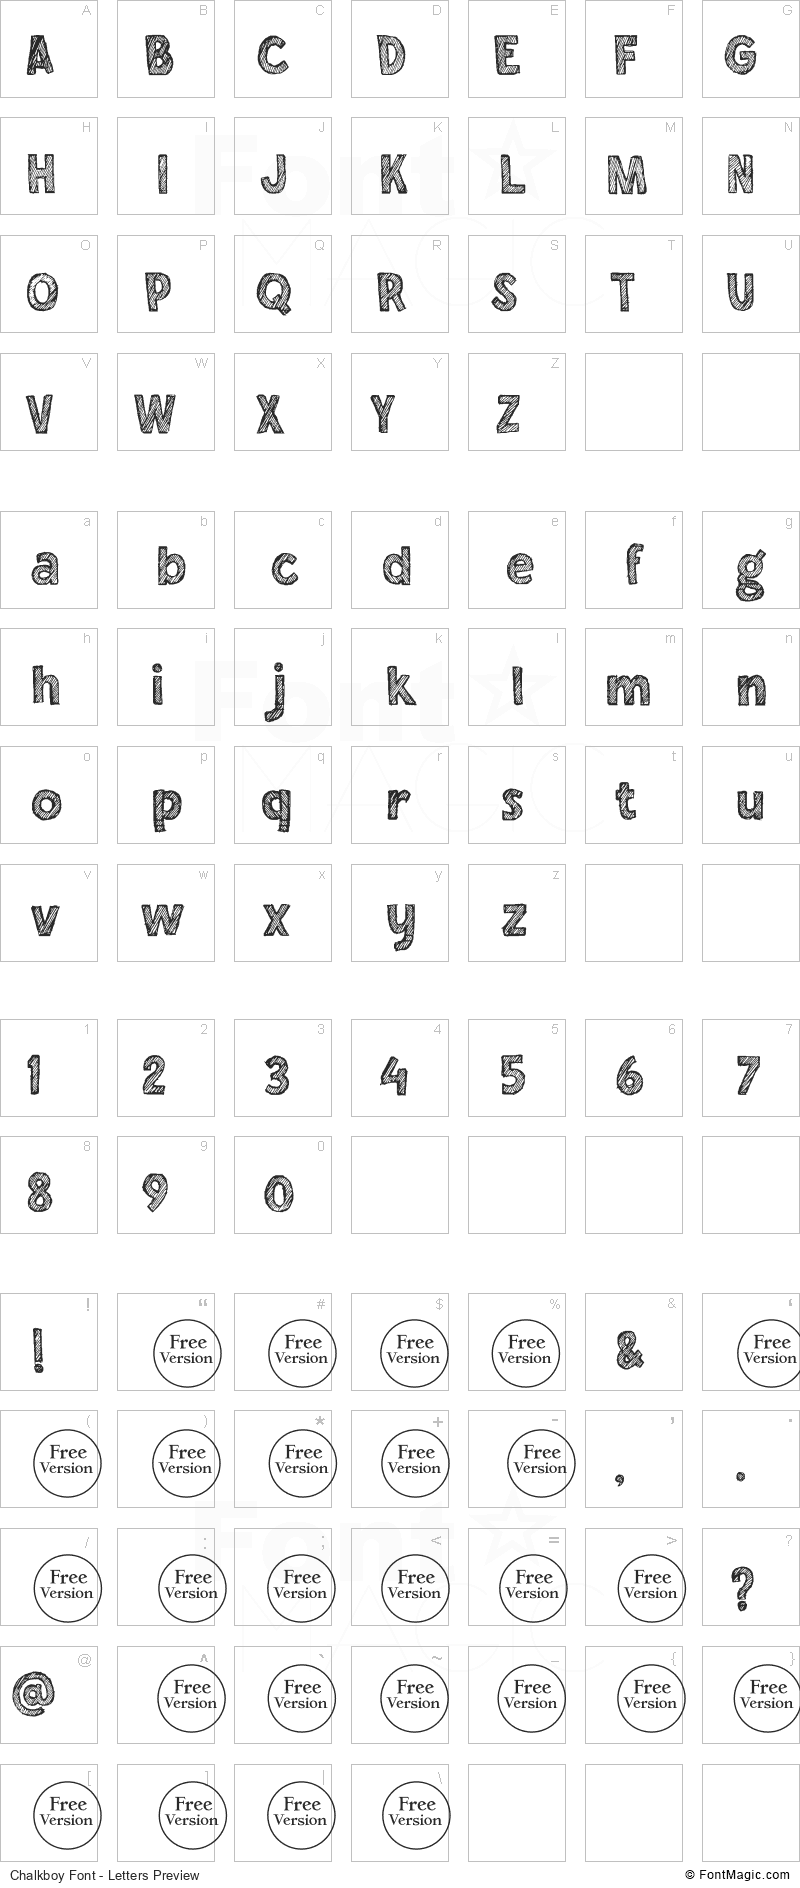 Chalkboy Font - All Latters Preview Chart